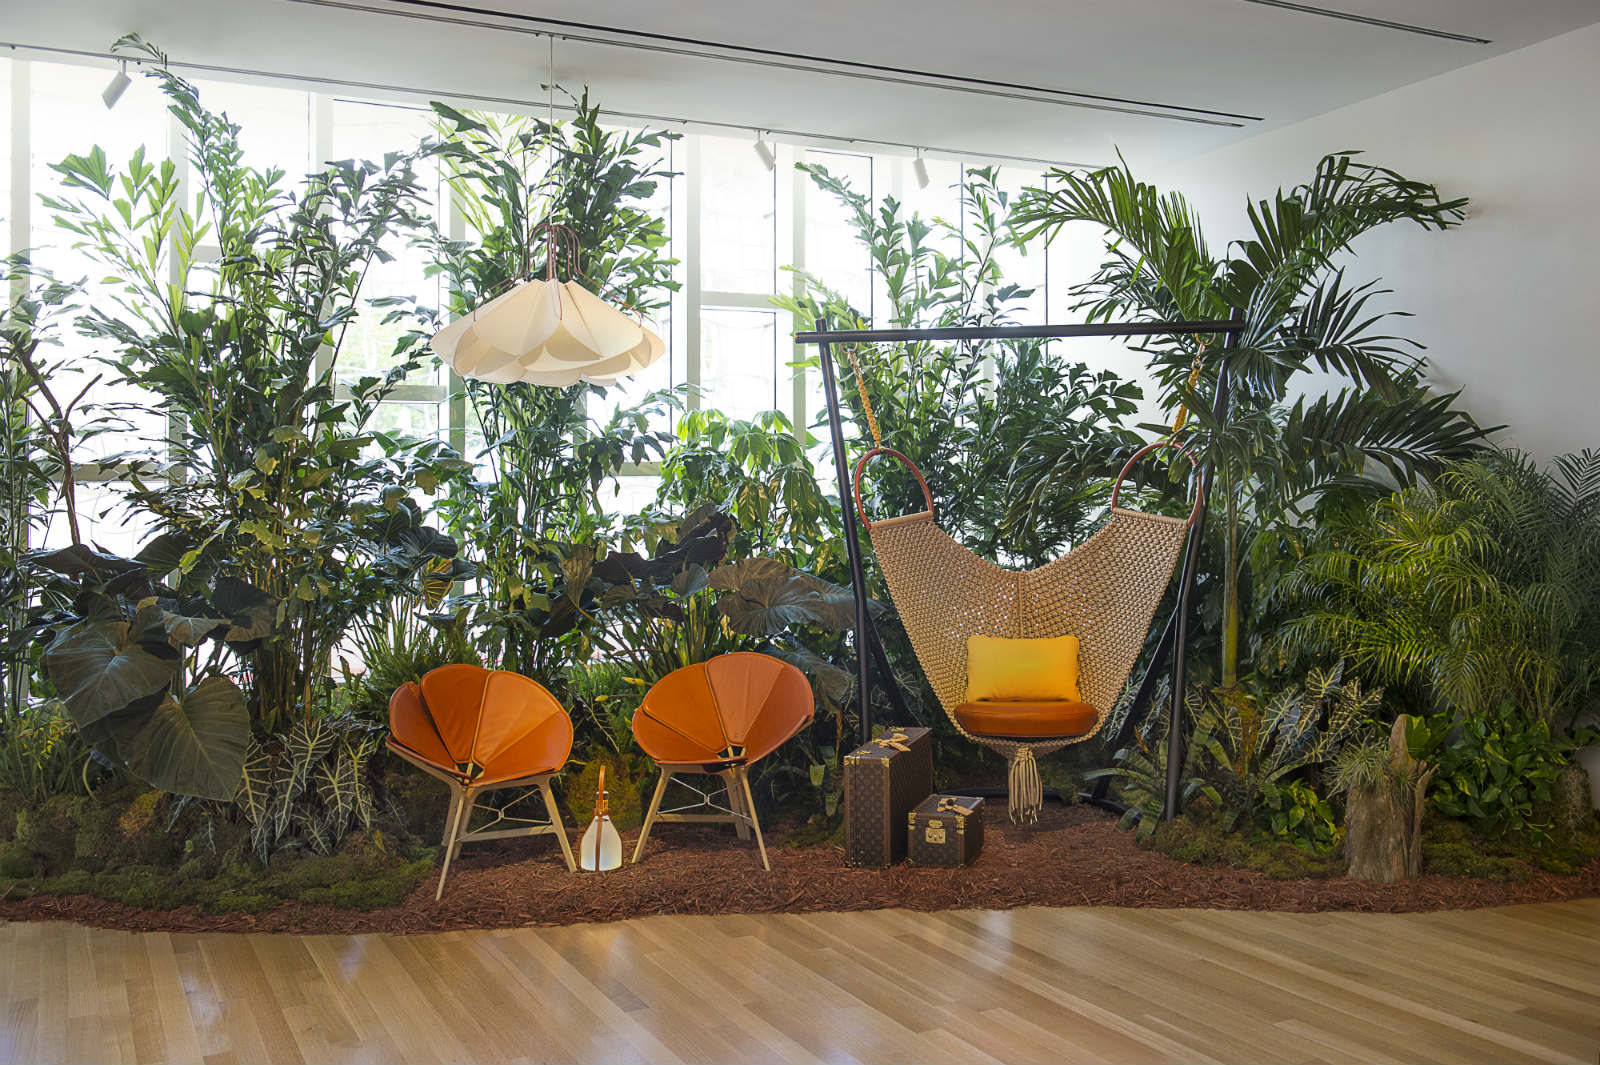 Miami Art Week 2015: Louis Vuitton's “Objets Nomades” - COOL HUNTING®